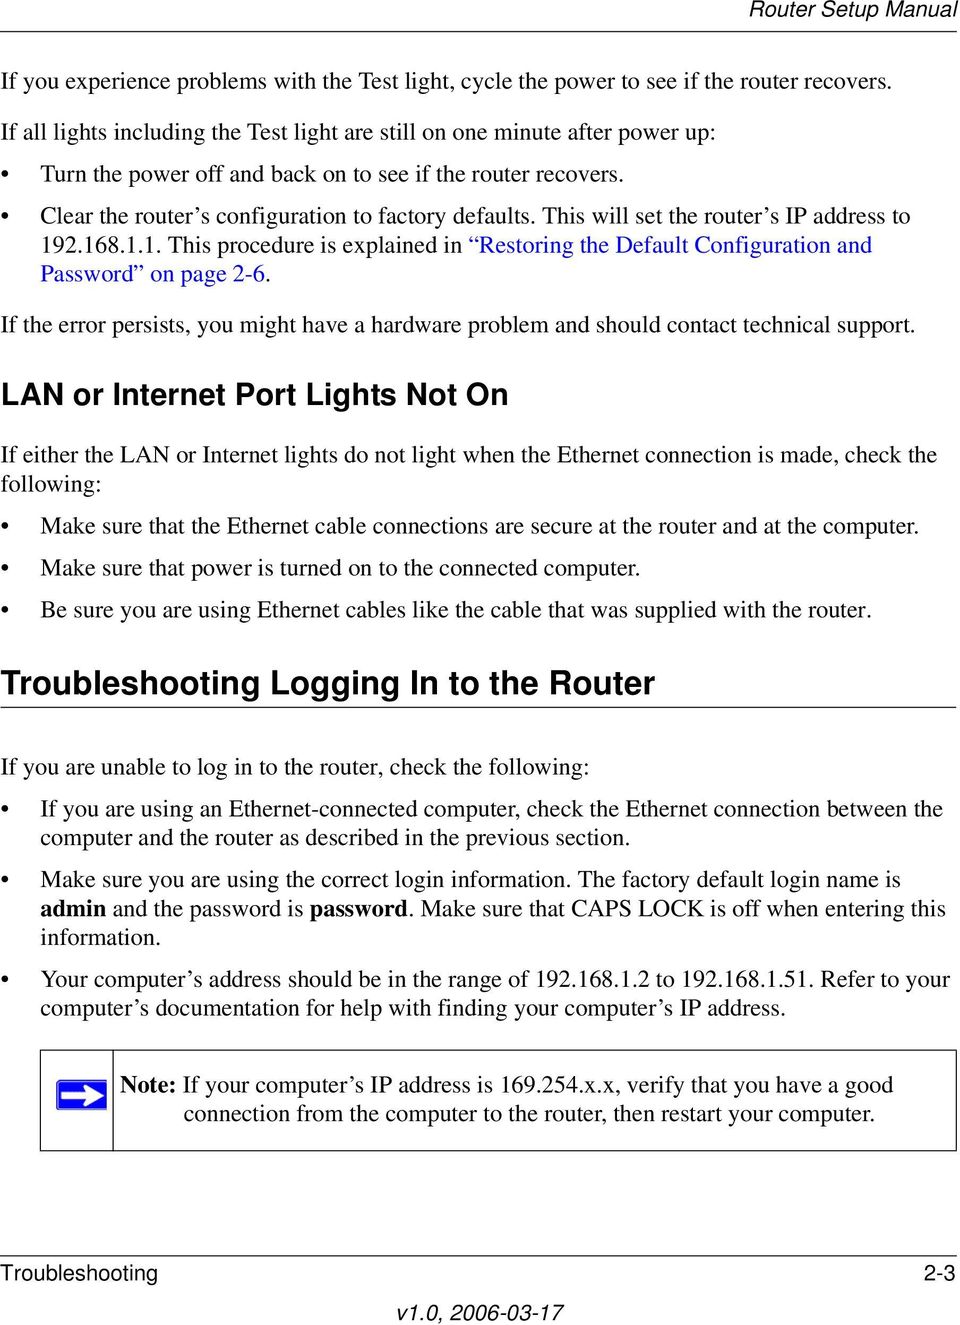 This will set the router s IP address to 192.168.1.1. This procedure is explained in Restoring the Default Configuration and Password on page 2-6.